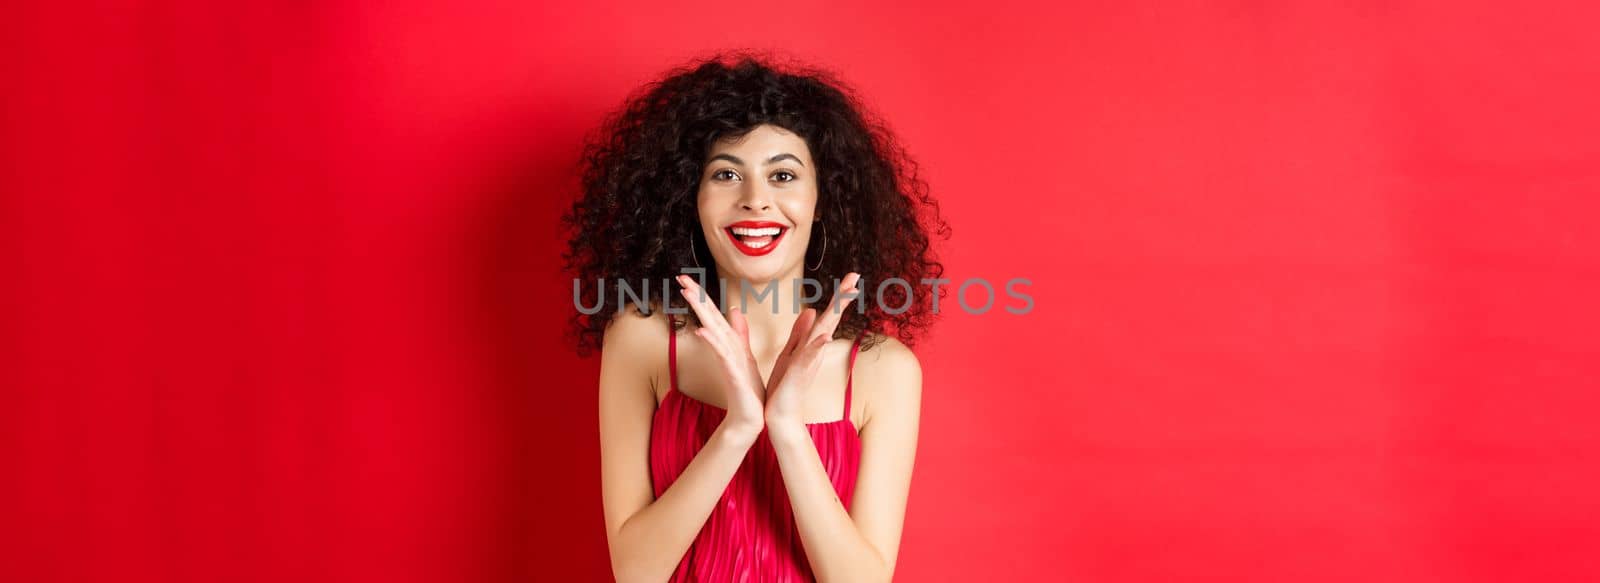 Cheerful young woman with curly hair, wearing evening dress, clap hands and smiling, praise good performance with applause, standing against red background.